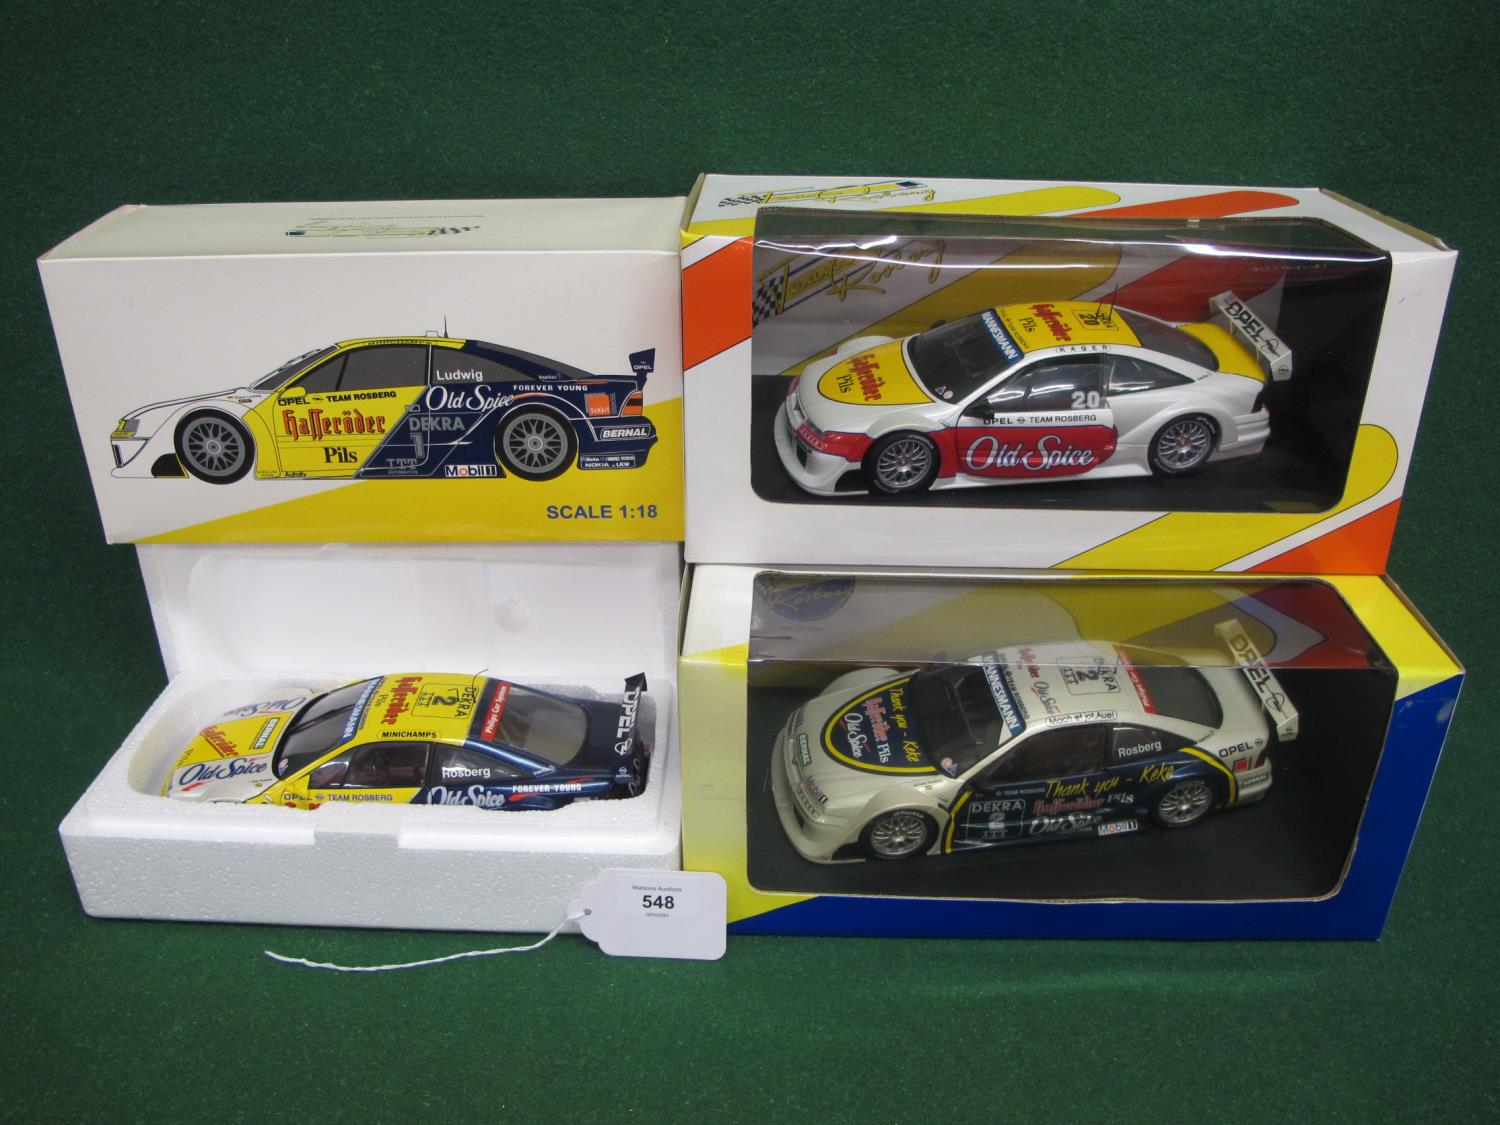 Three Minichamps UT Models 1:18 scale Opel racing cars in Team Rosberg liveries, boxed Please note - Image 3 of 3